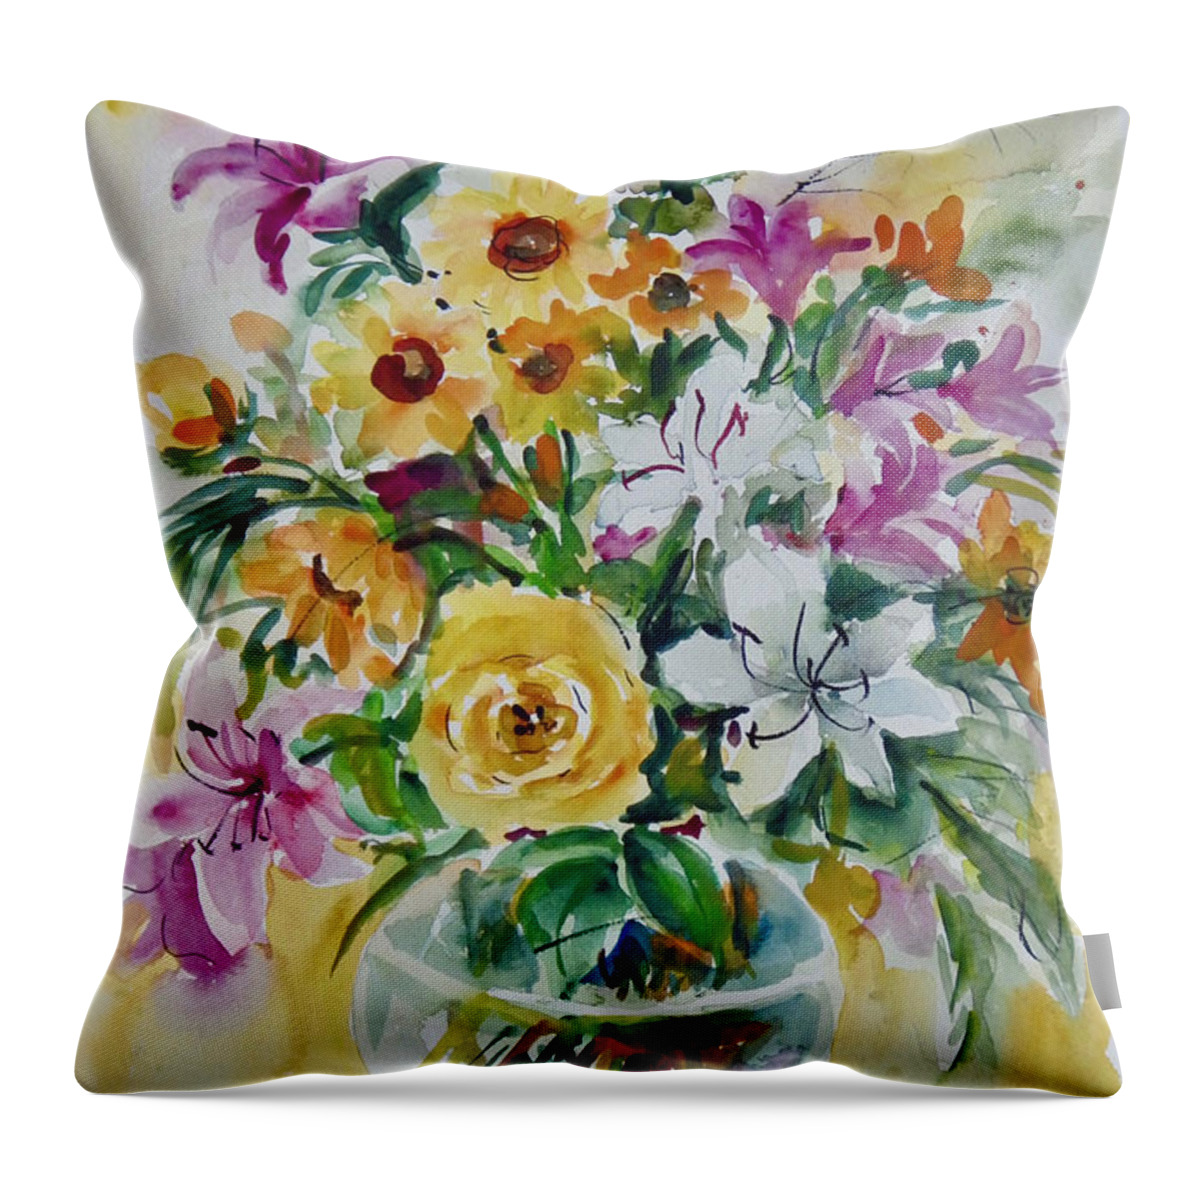 Flowers Throw Pillow featuring the painting Floral Still Life Yellow Rose by Ingrid Dohm